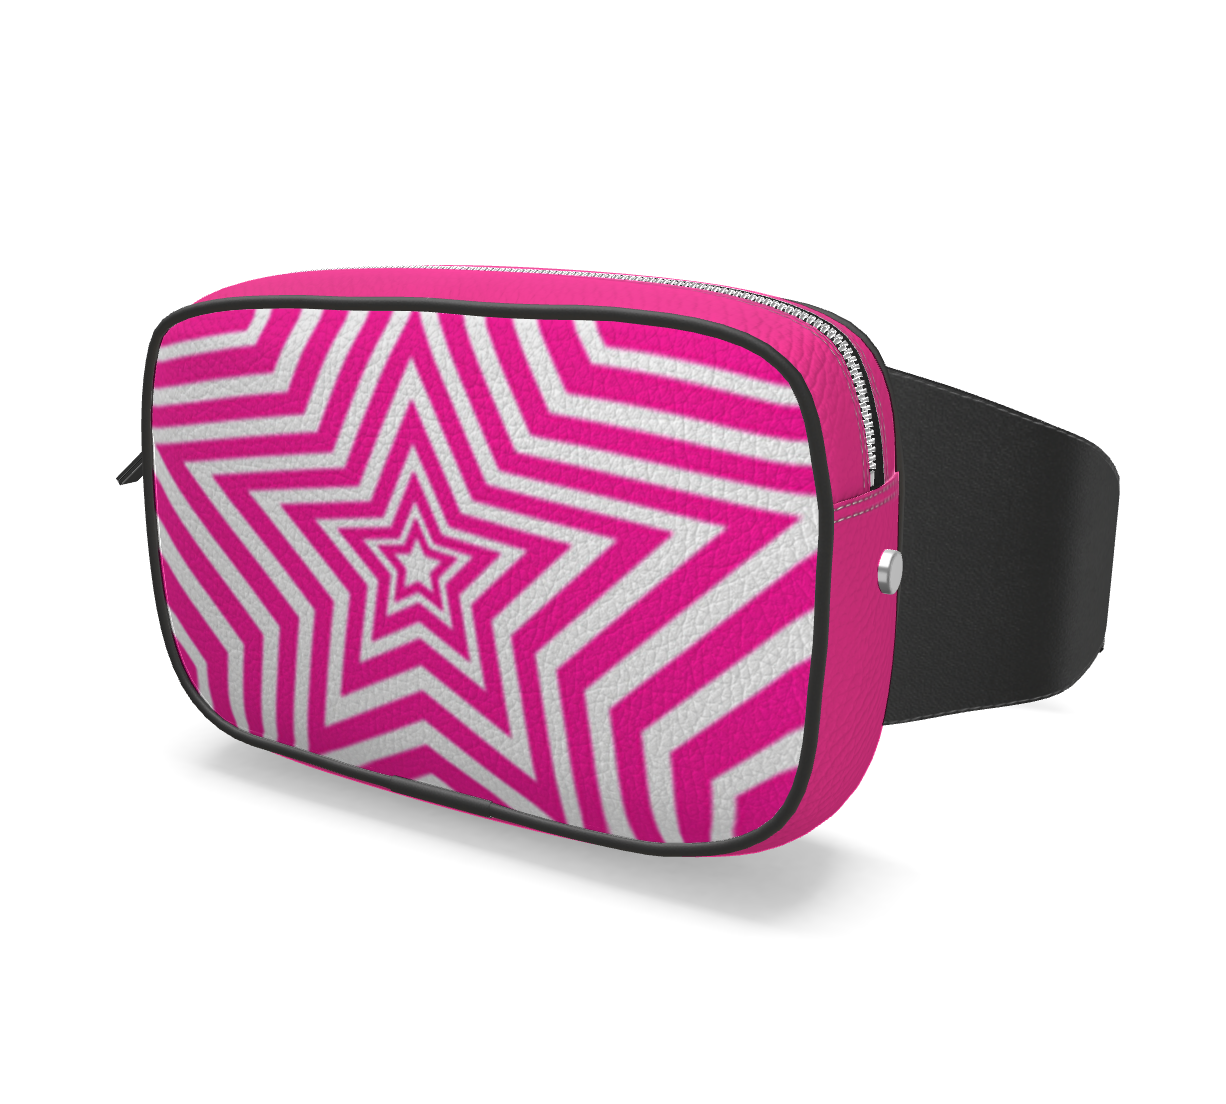 UNTITLED BOUTIQUE Pink and White Leather Star Belt Bag - Limited Edition